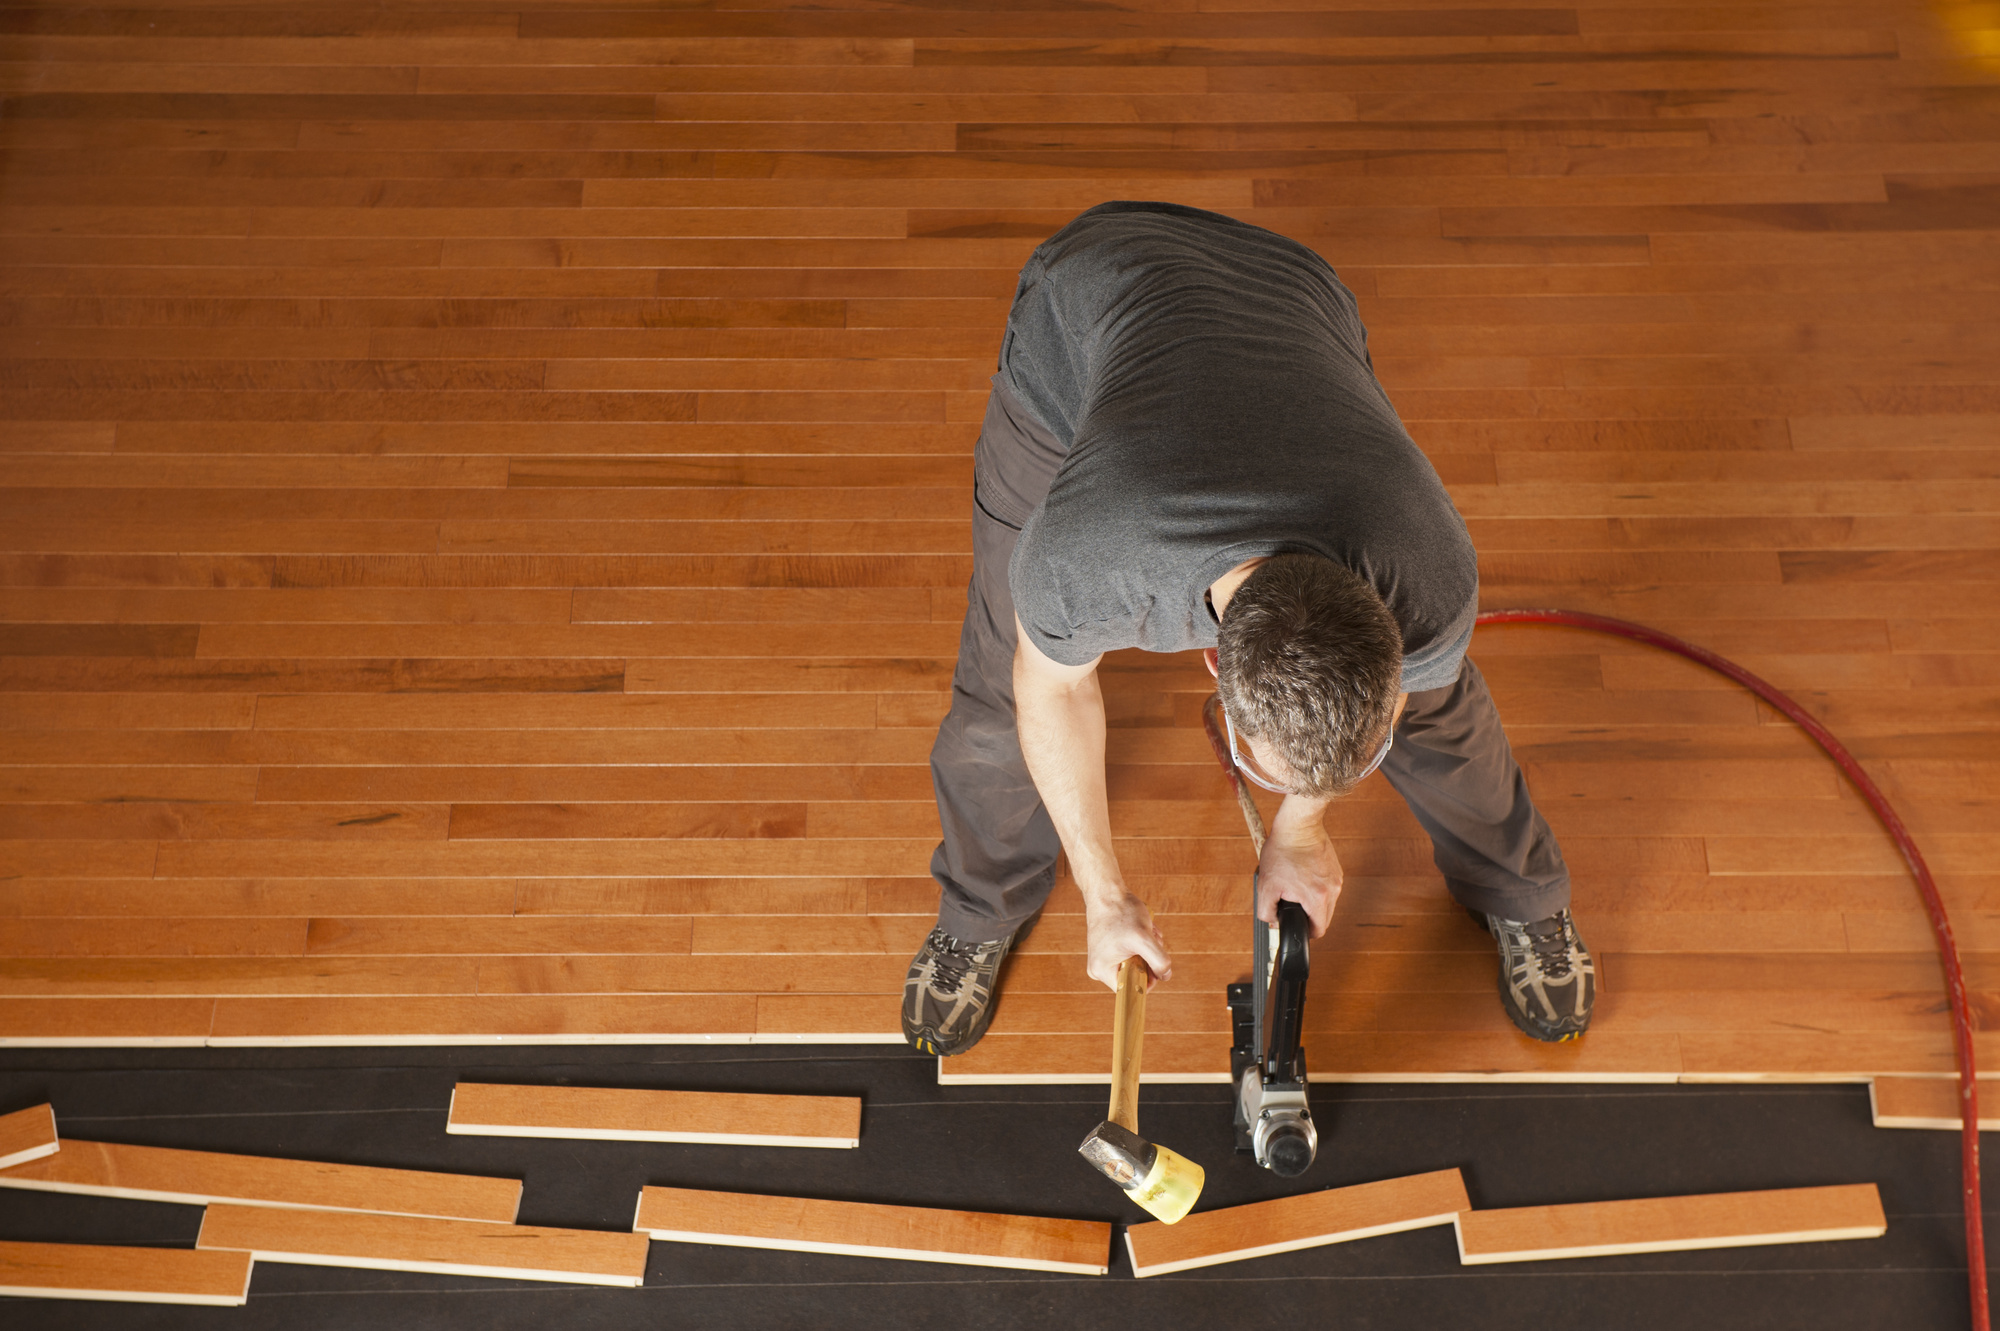 How Much Does Hardwood Flooring Cost to Install? - Oak and Broad